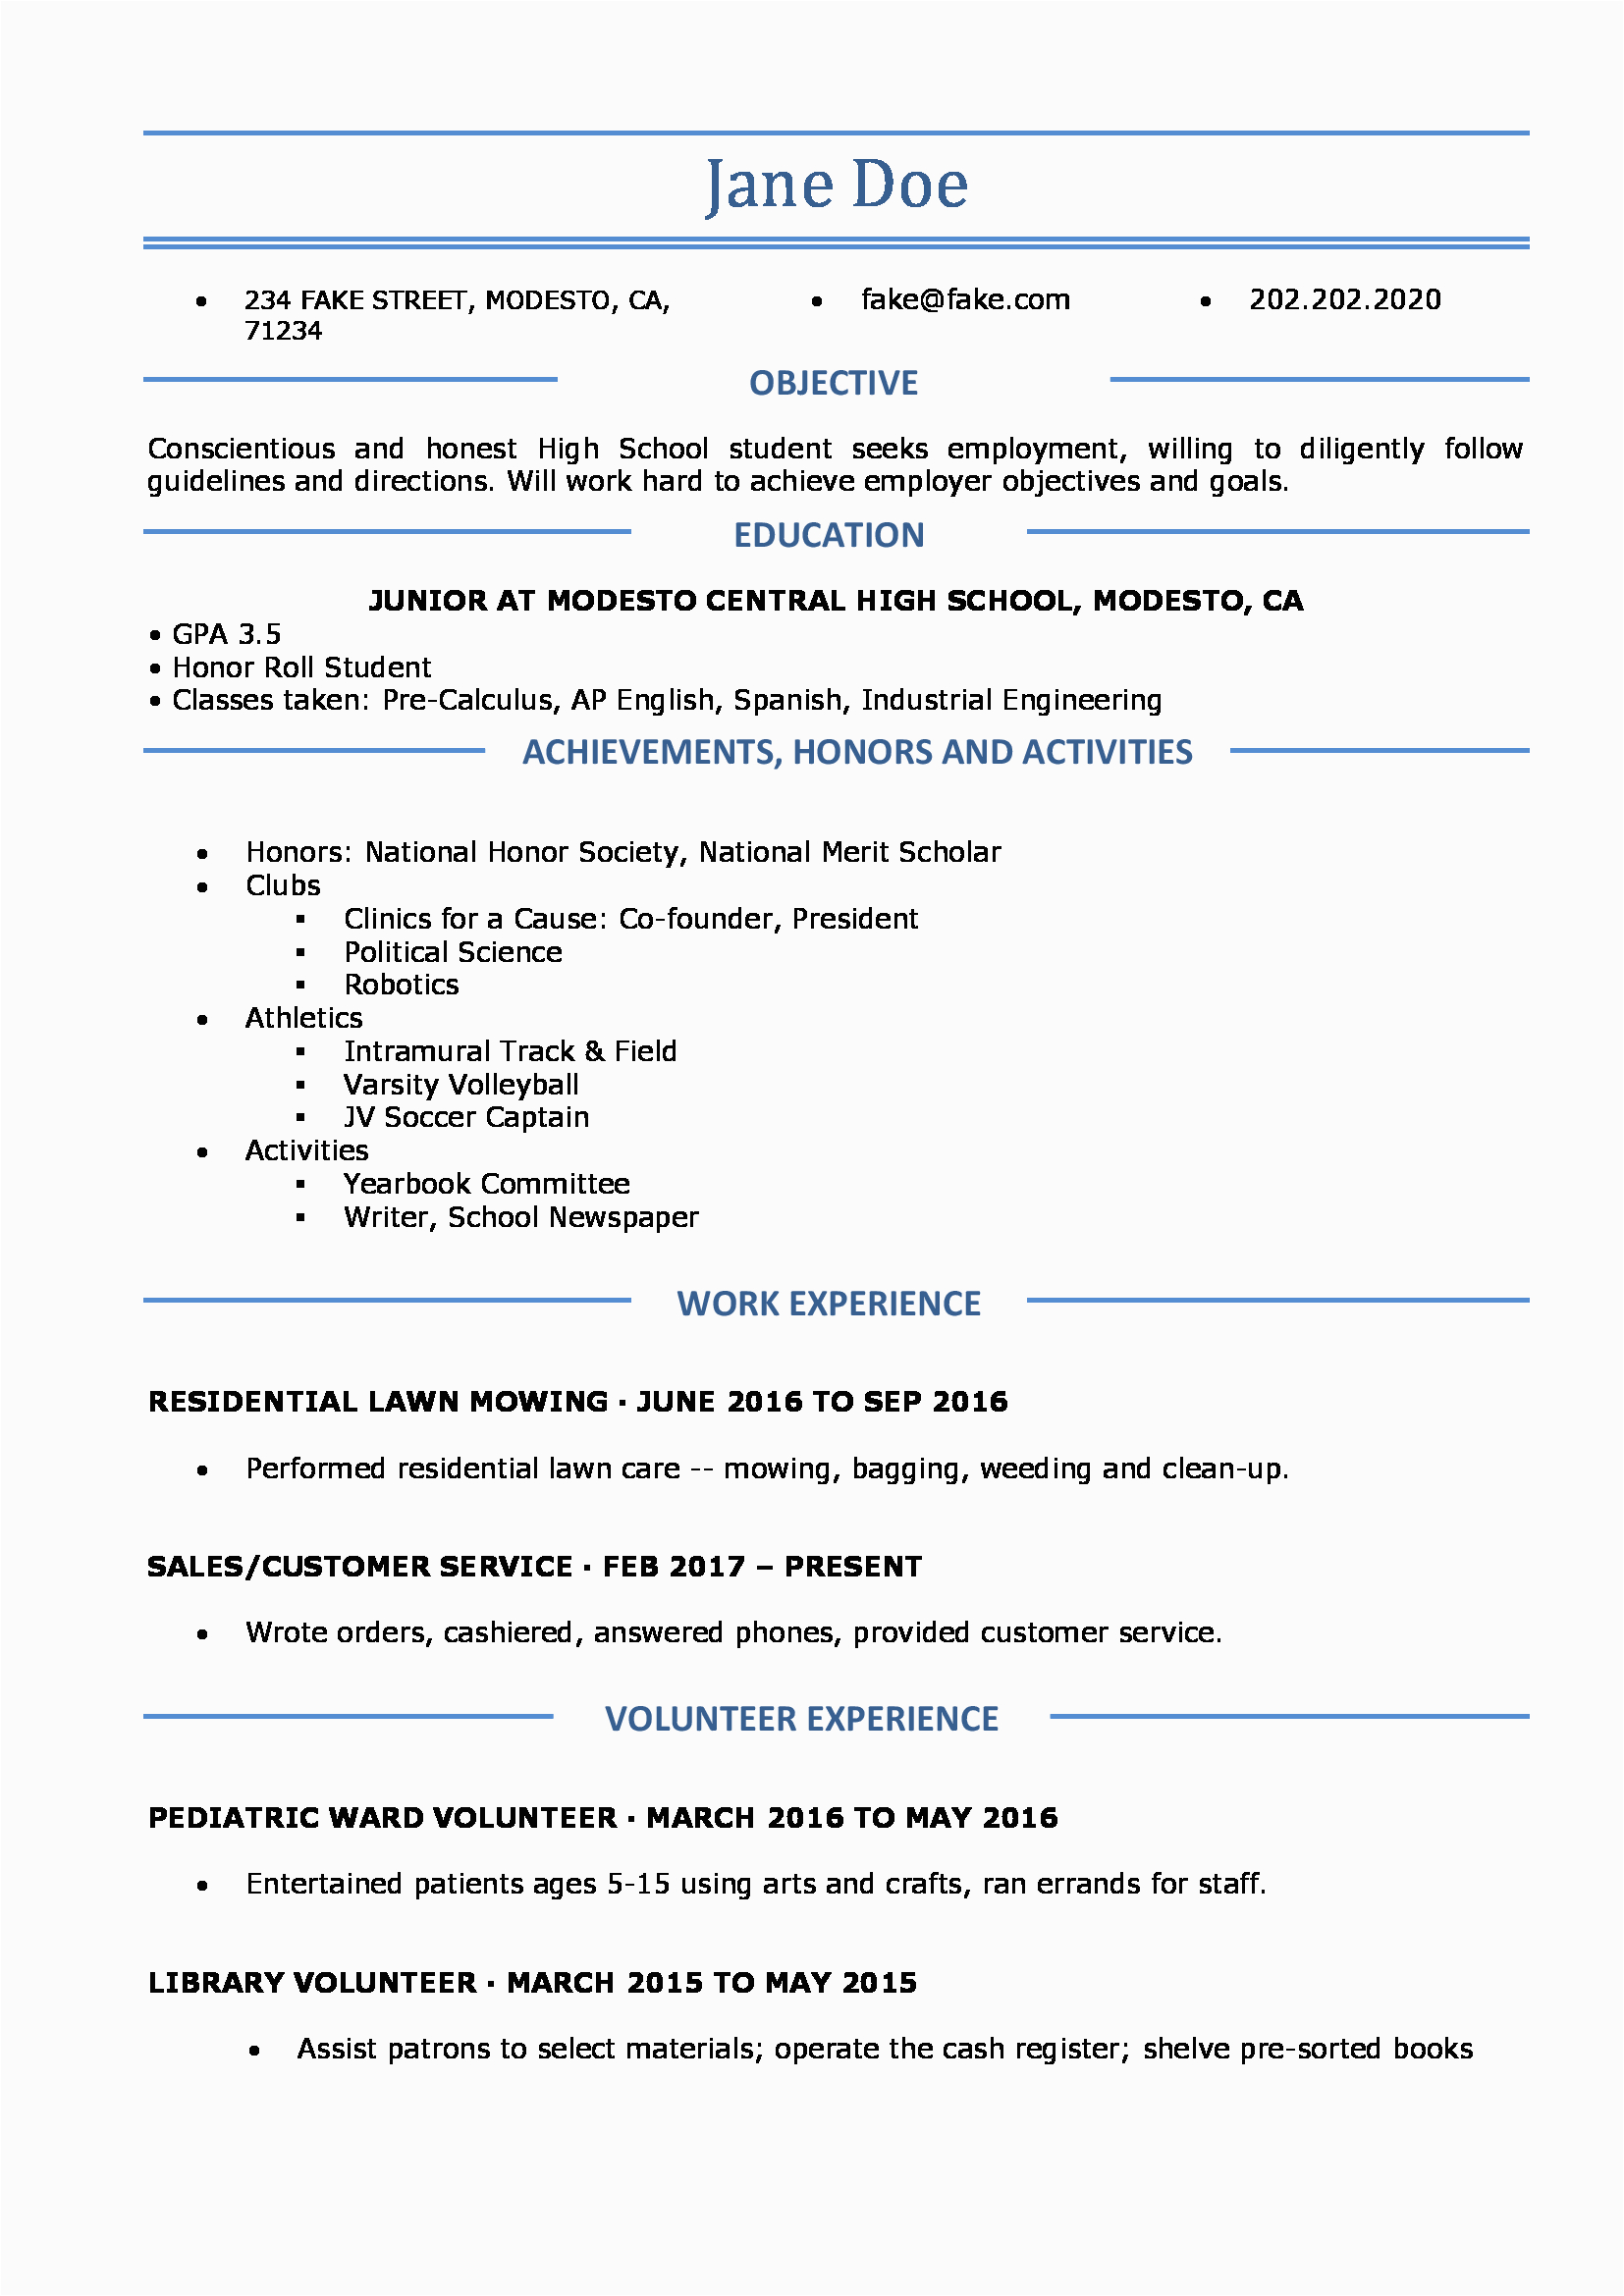 Resume Writing for High School Students Template High School Resume Resume Templates for High School